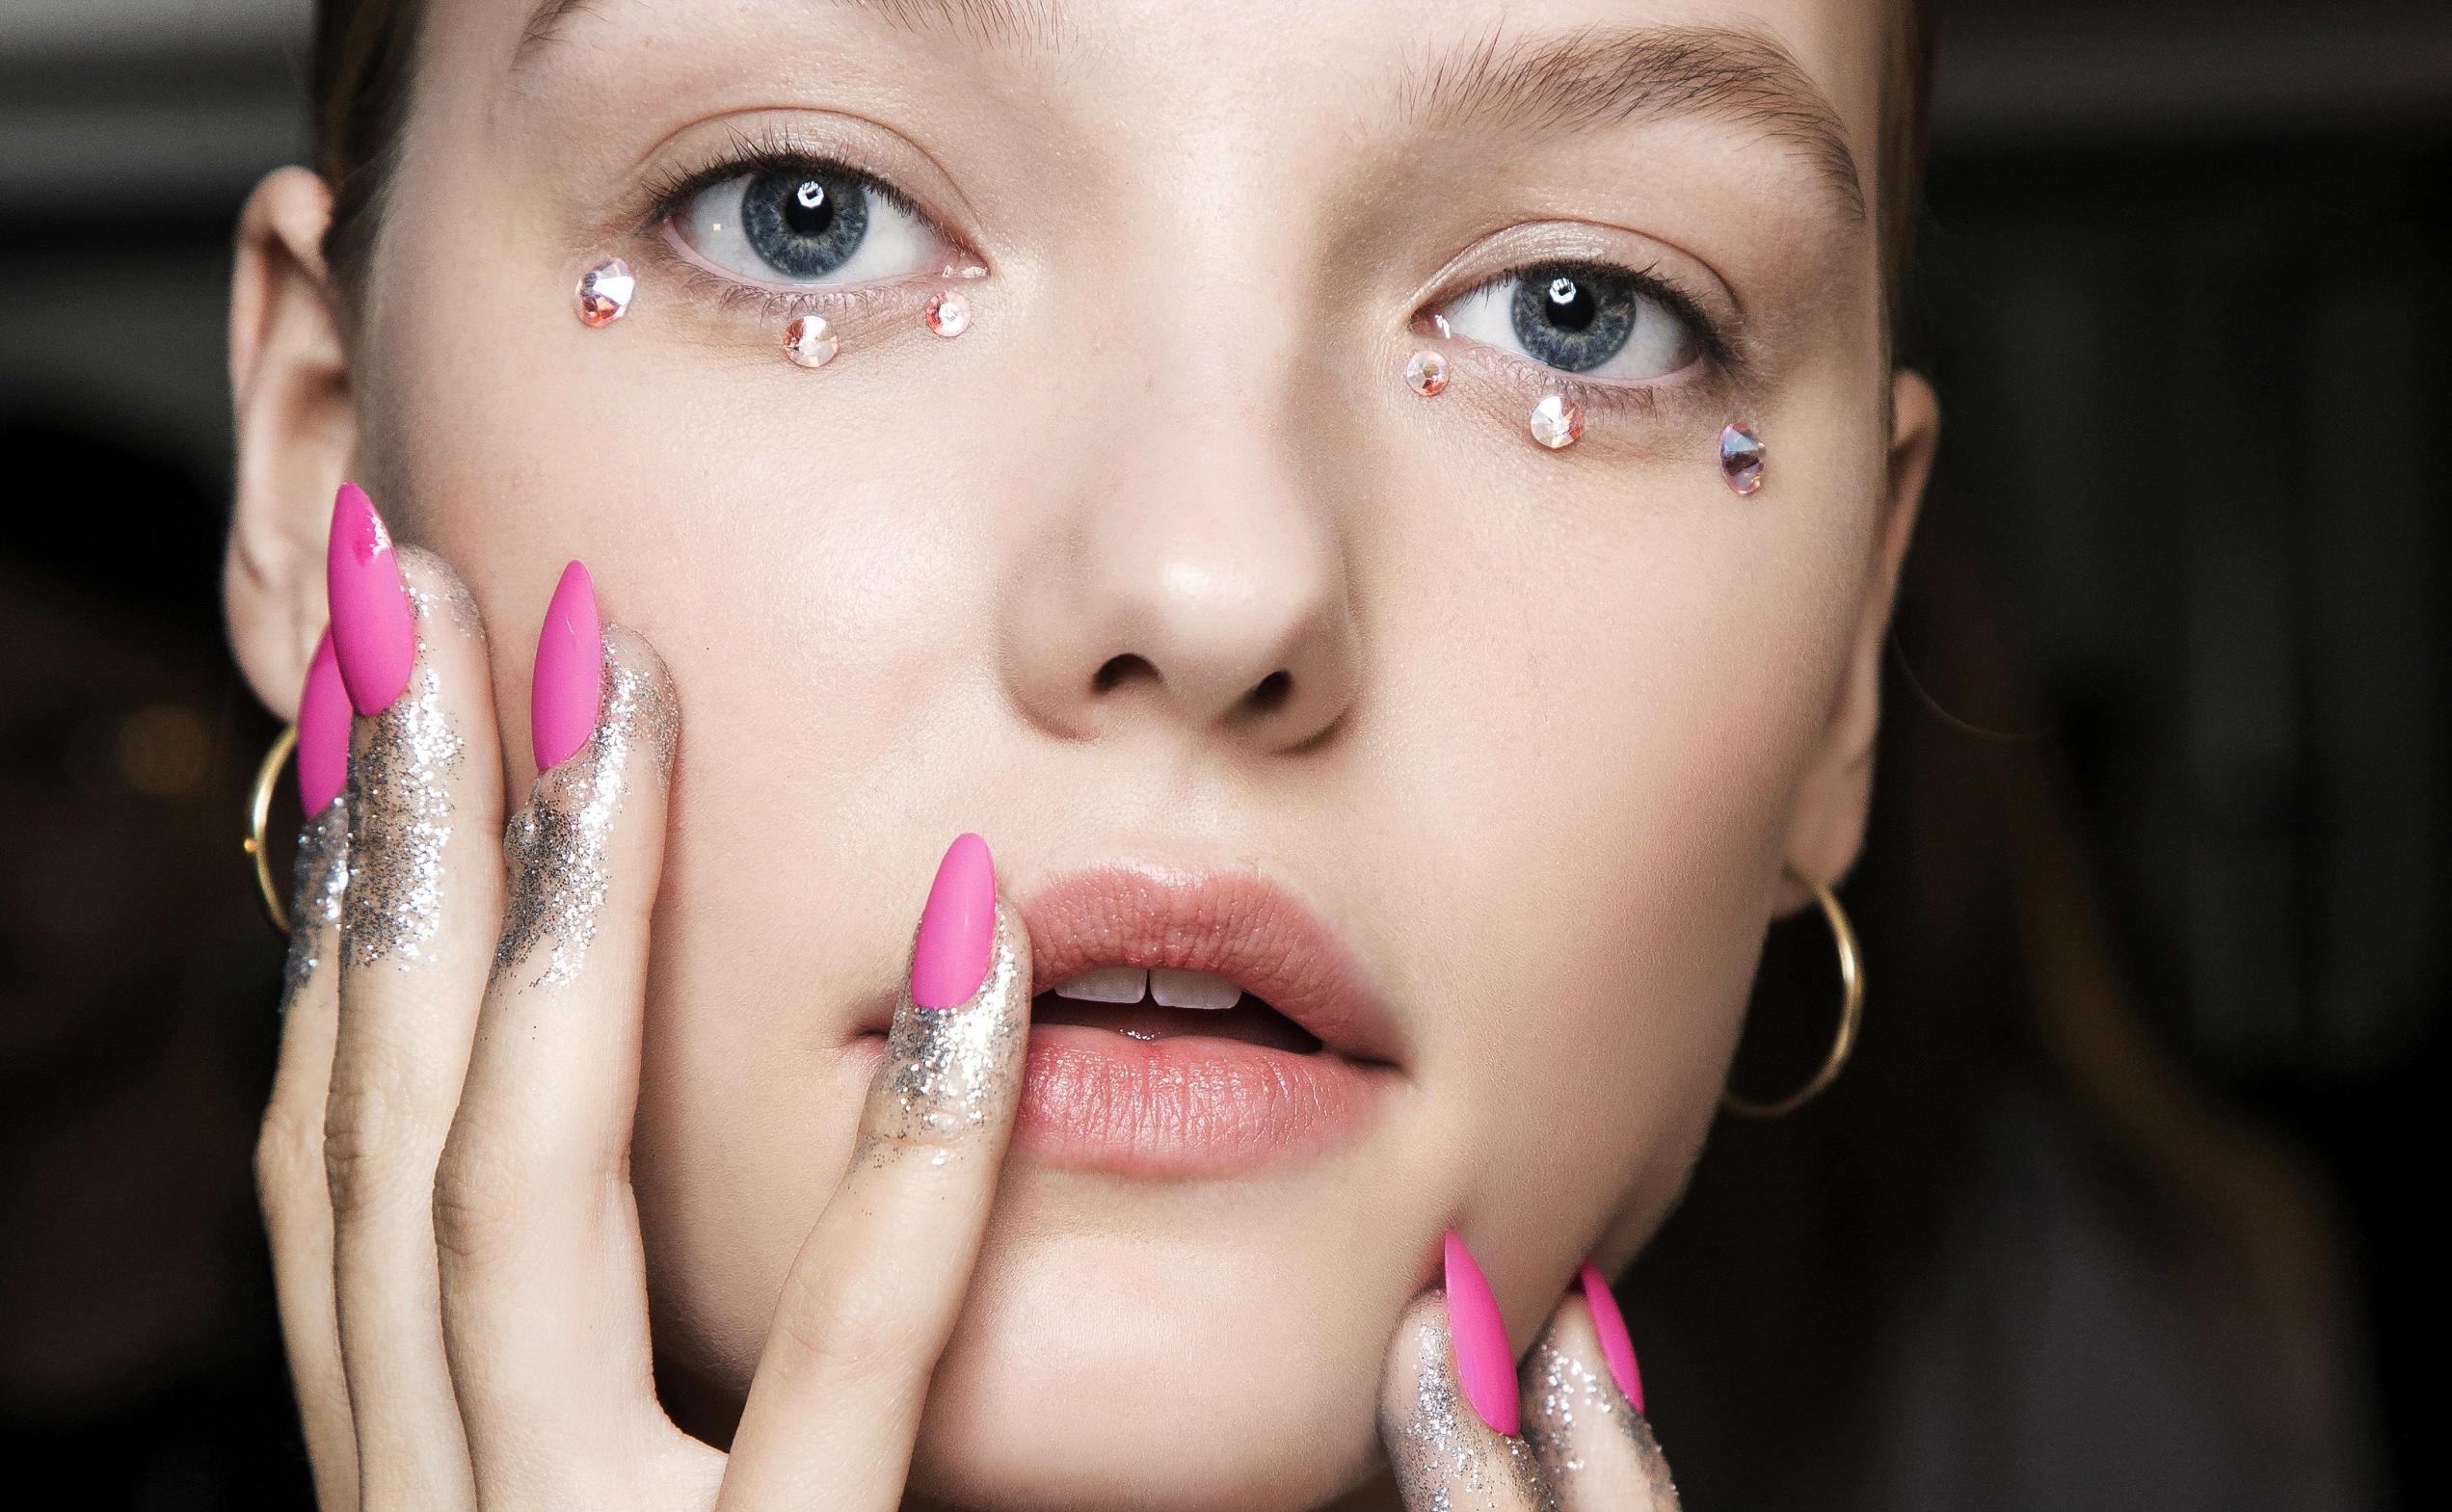 Hand Art Is the New Nail Art — and We Love It